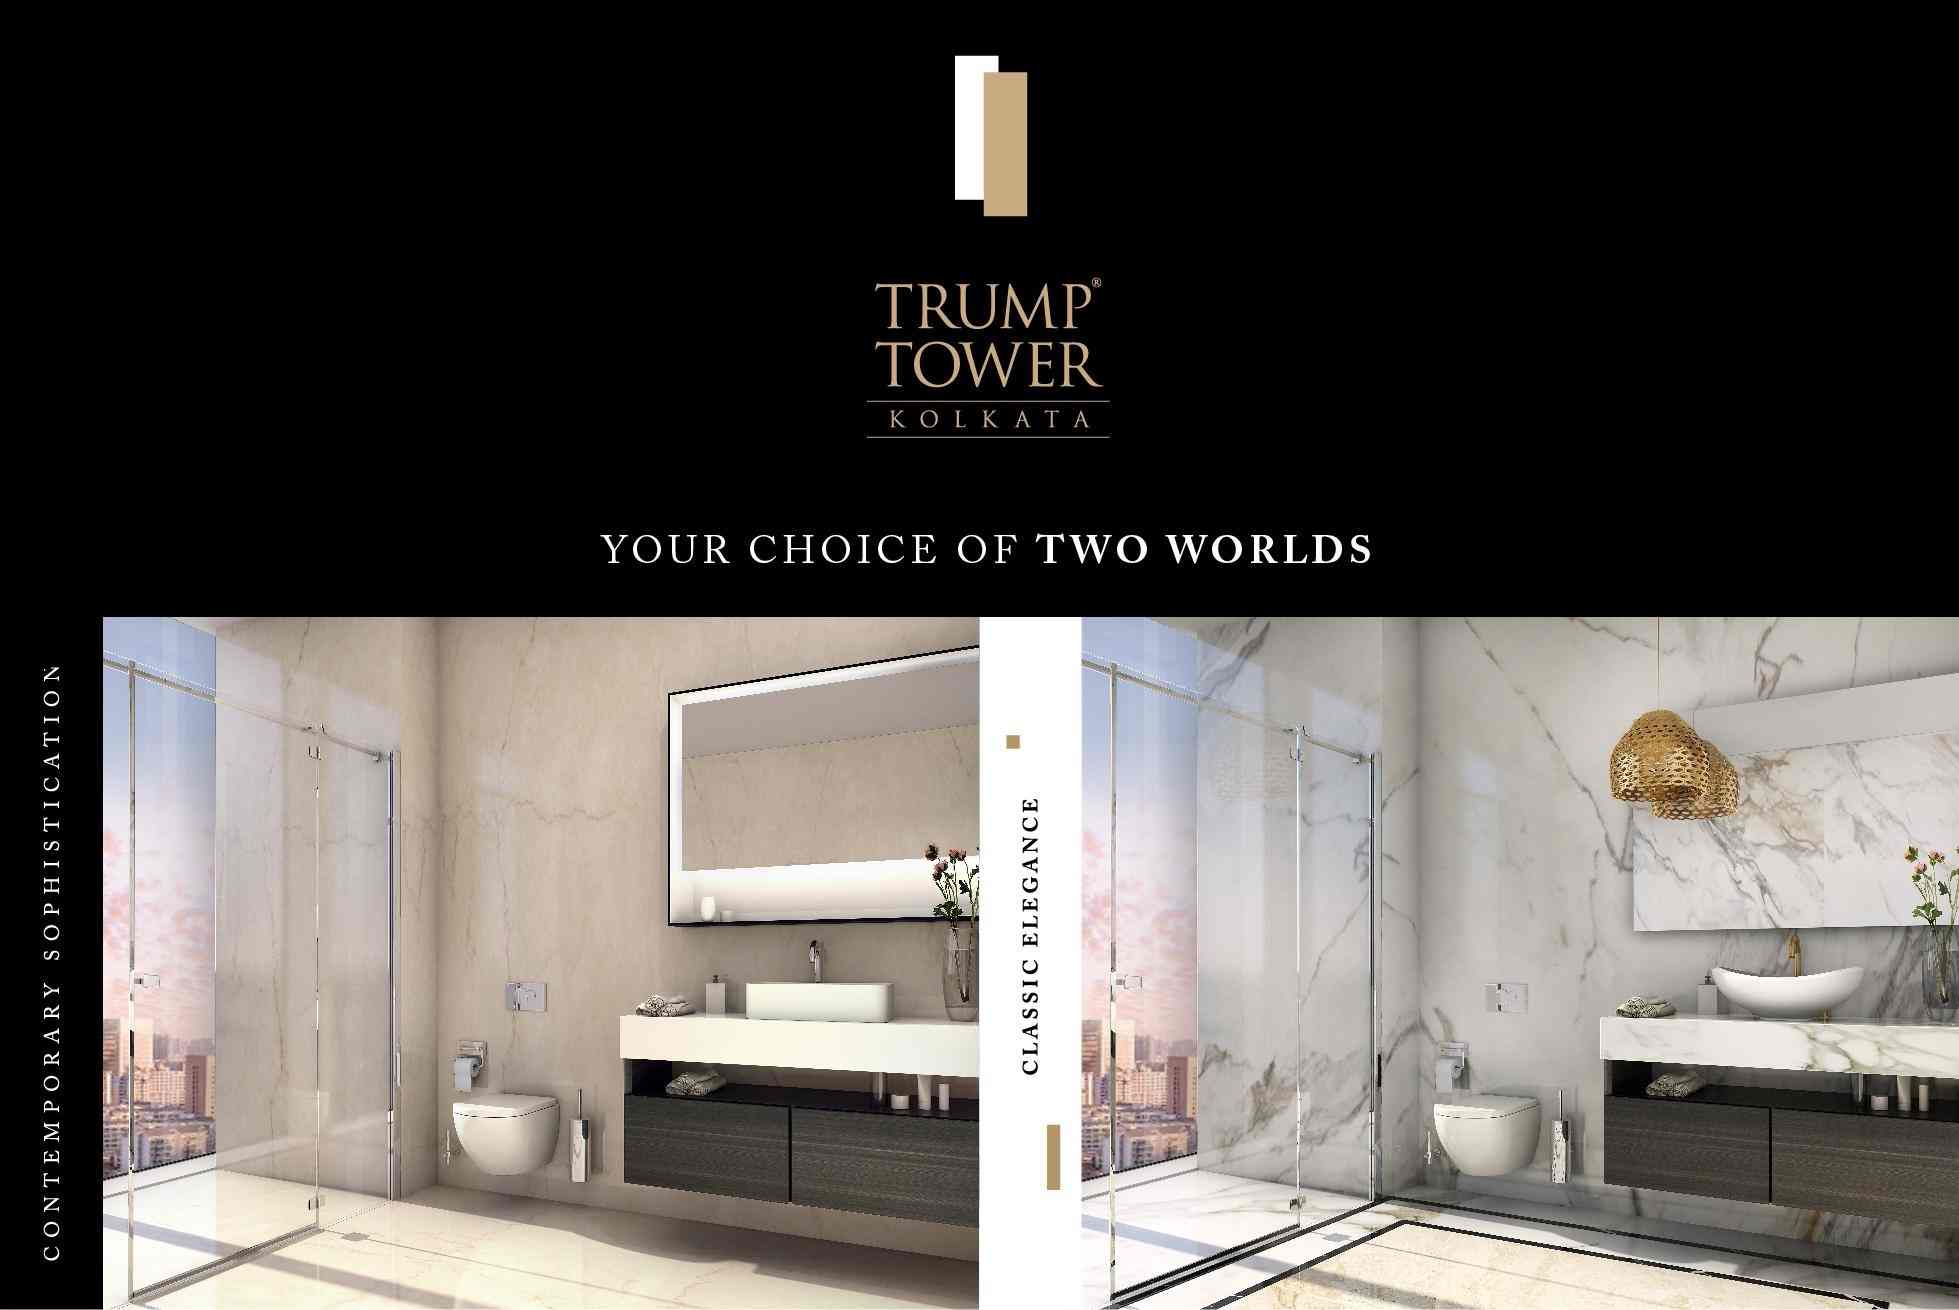 Your choice of two worlds at Unimark Trump Tower in Kolkata